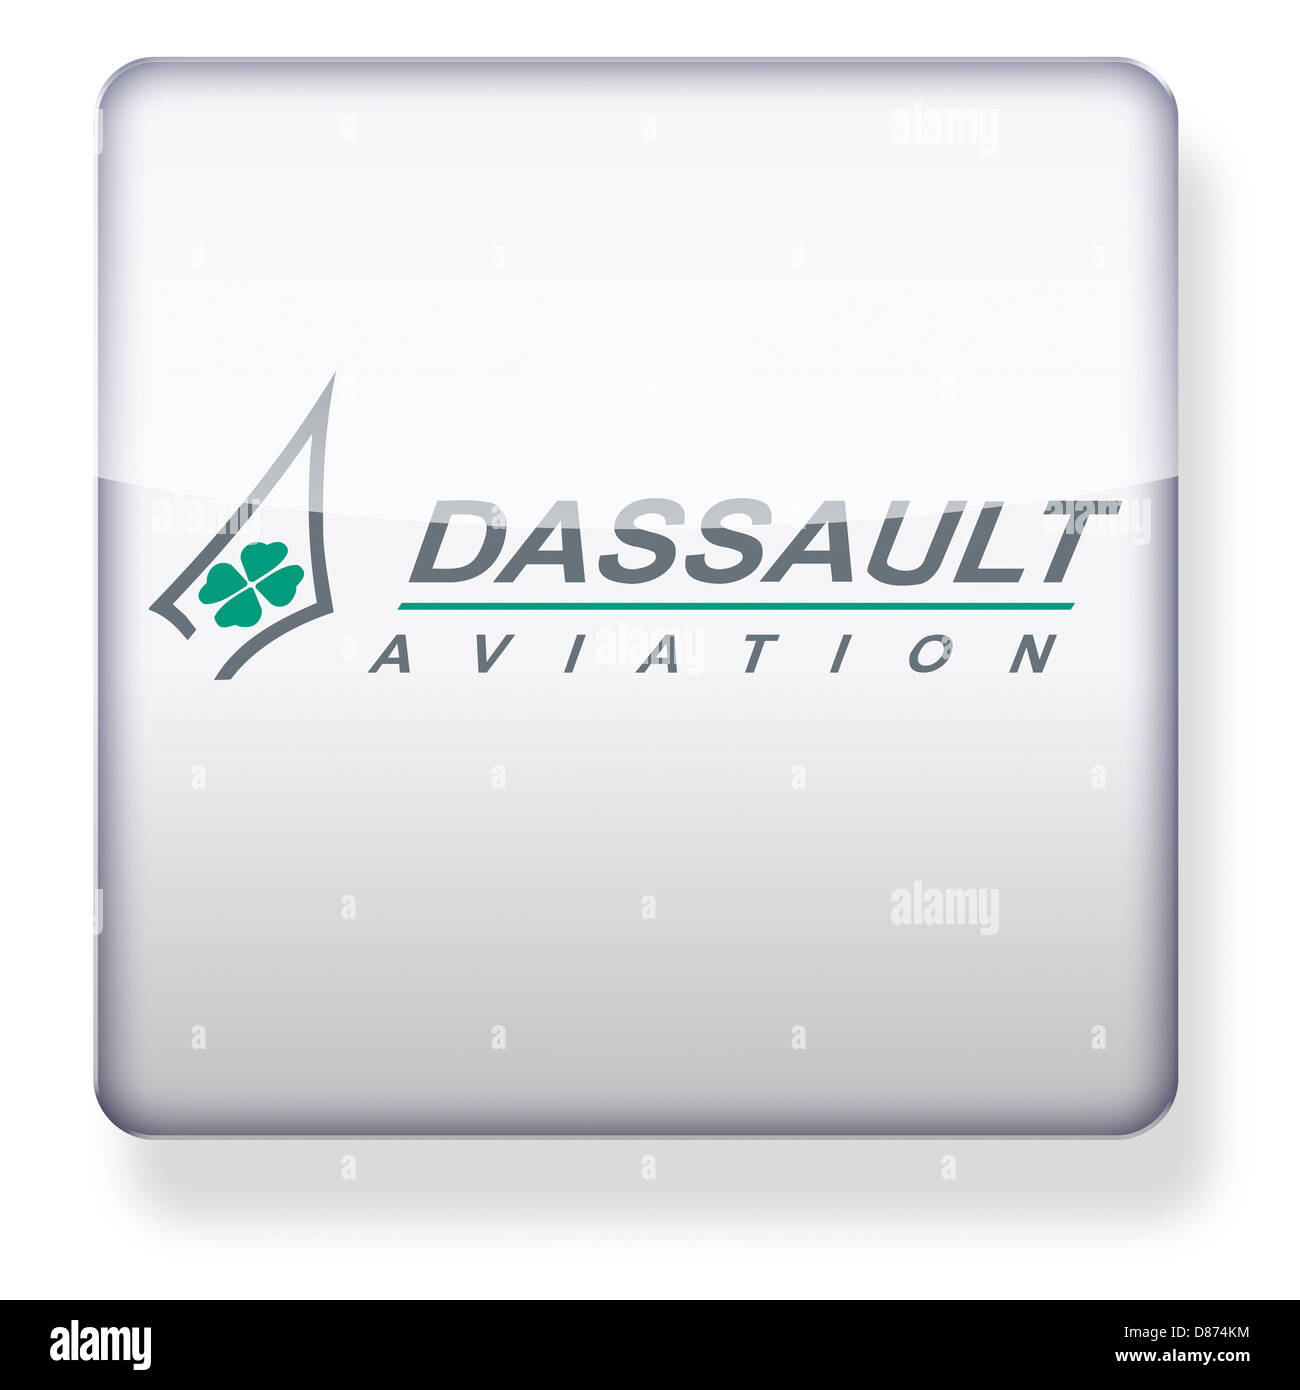 Dassault Aviation logo as an app icon. Clipping path included. Stock Photo